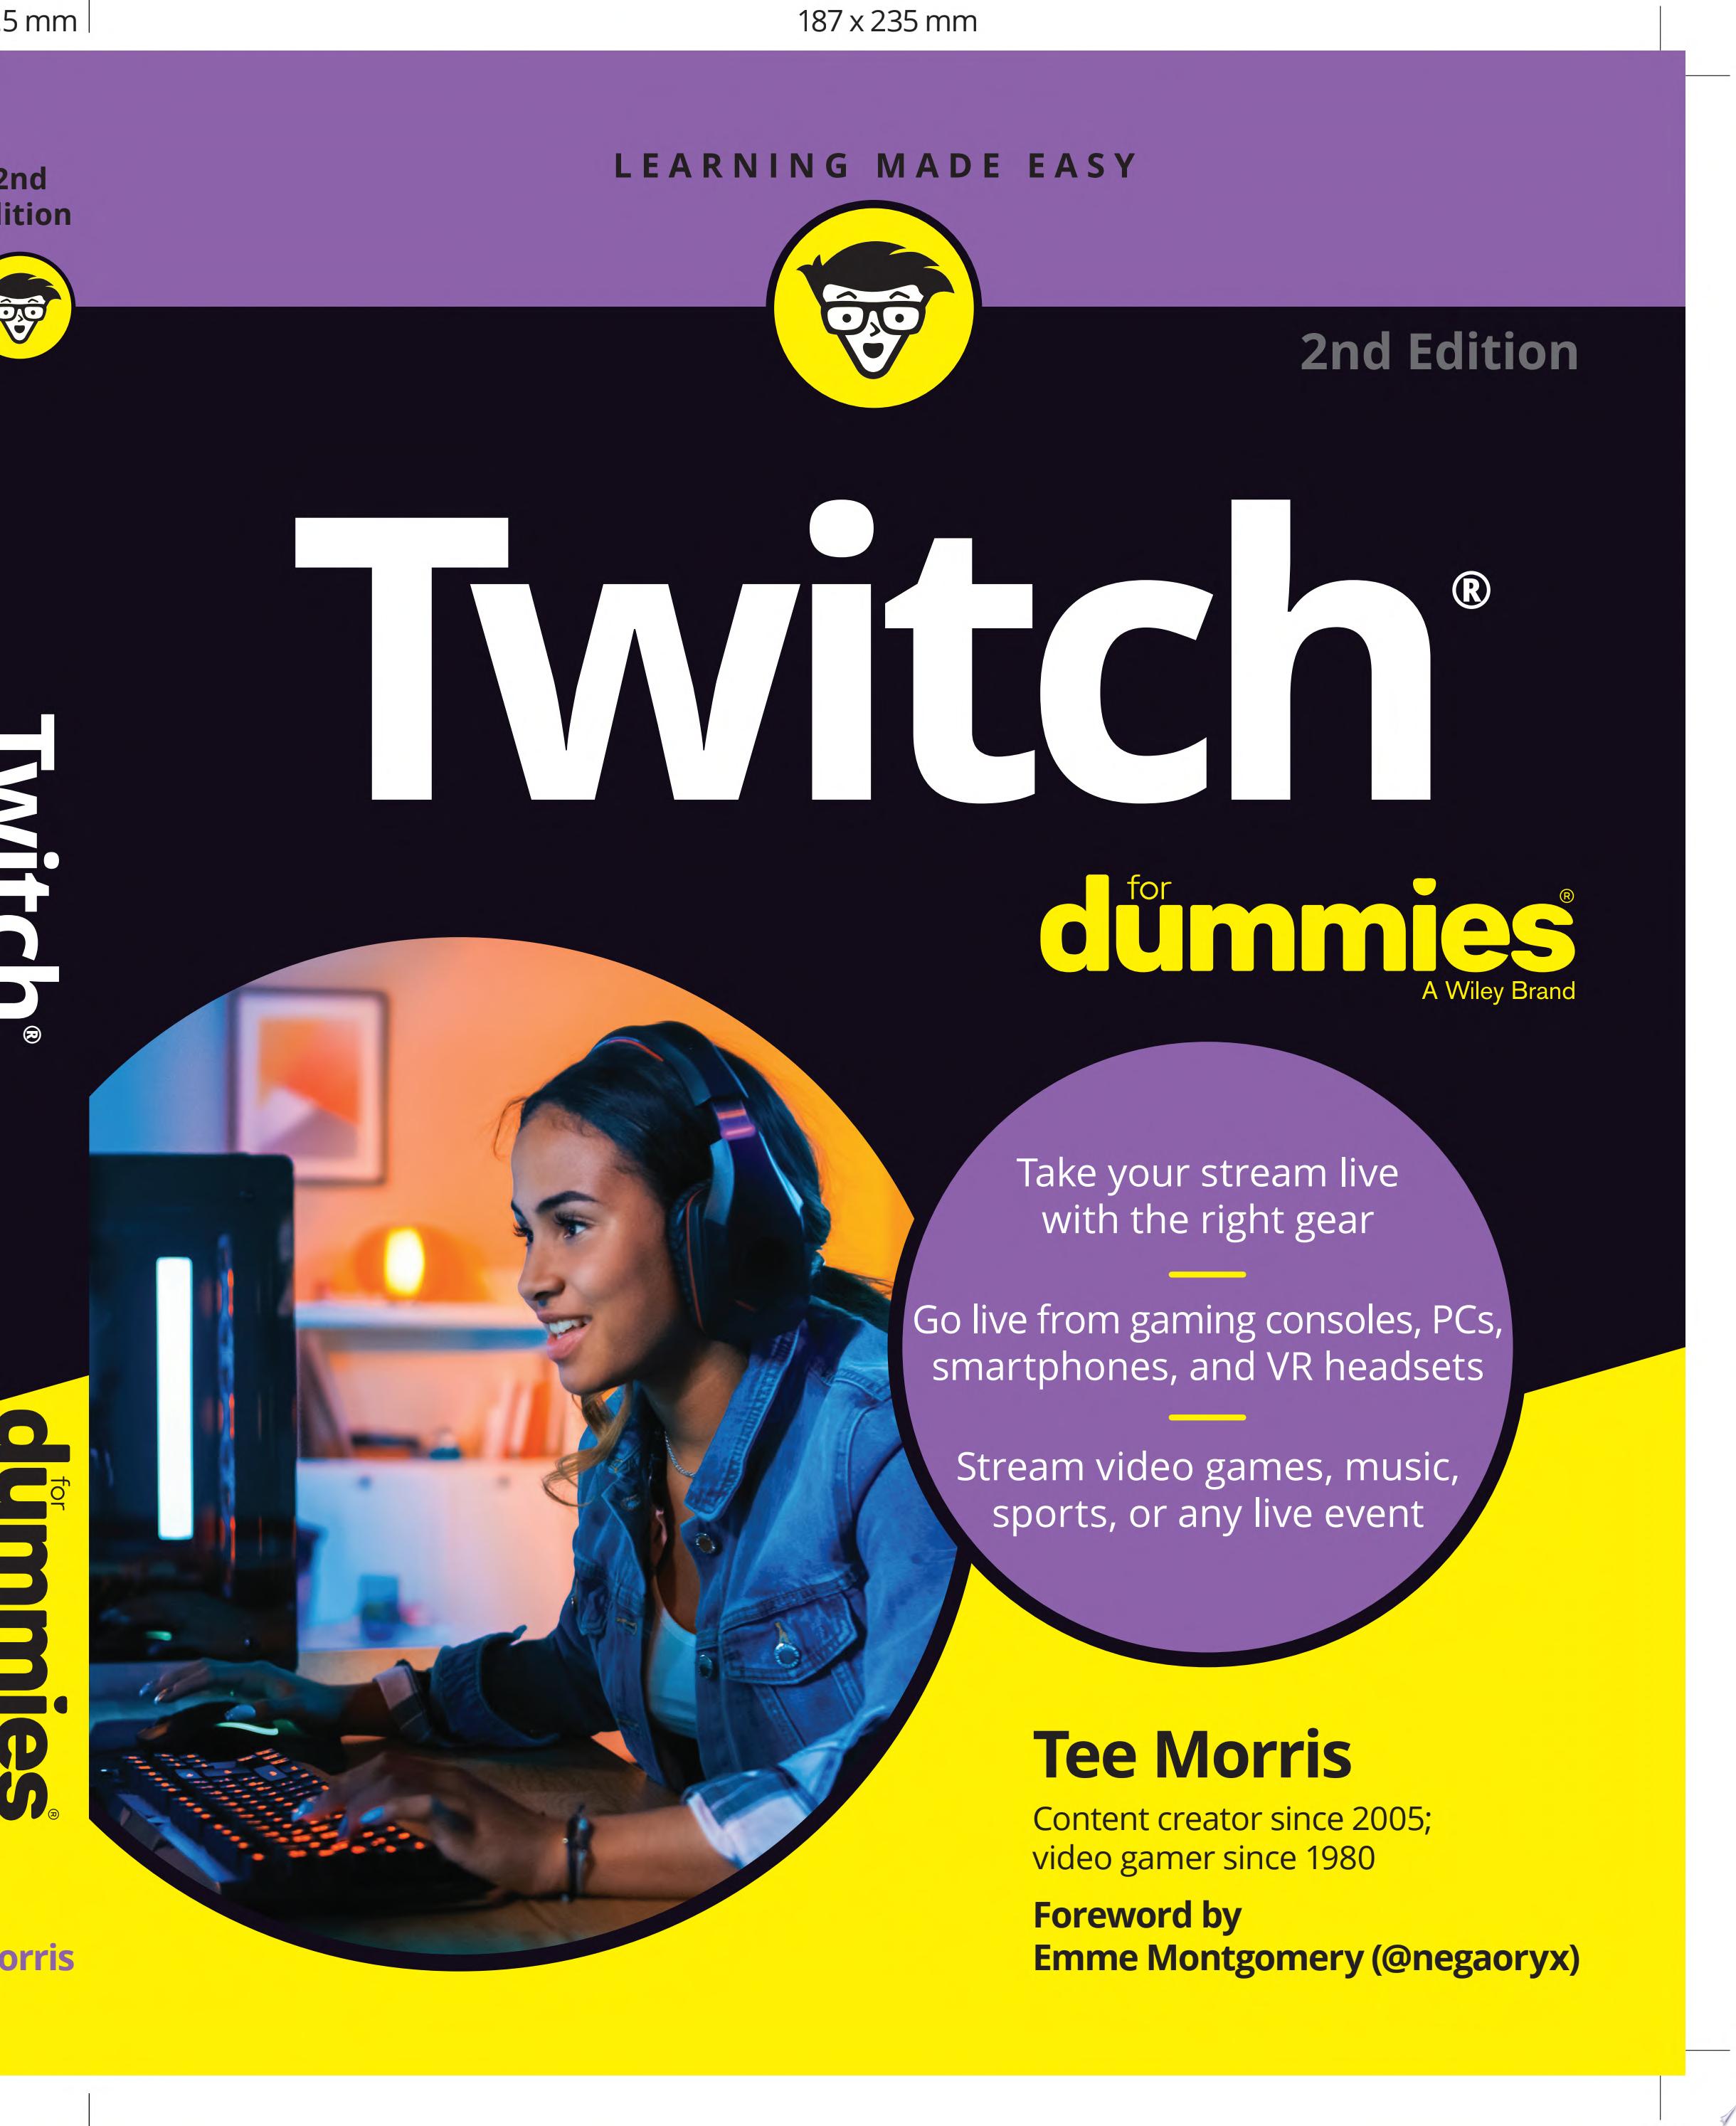 Image for "Twitch For Dummies"